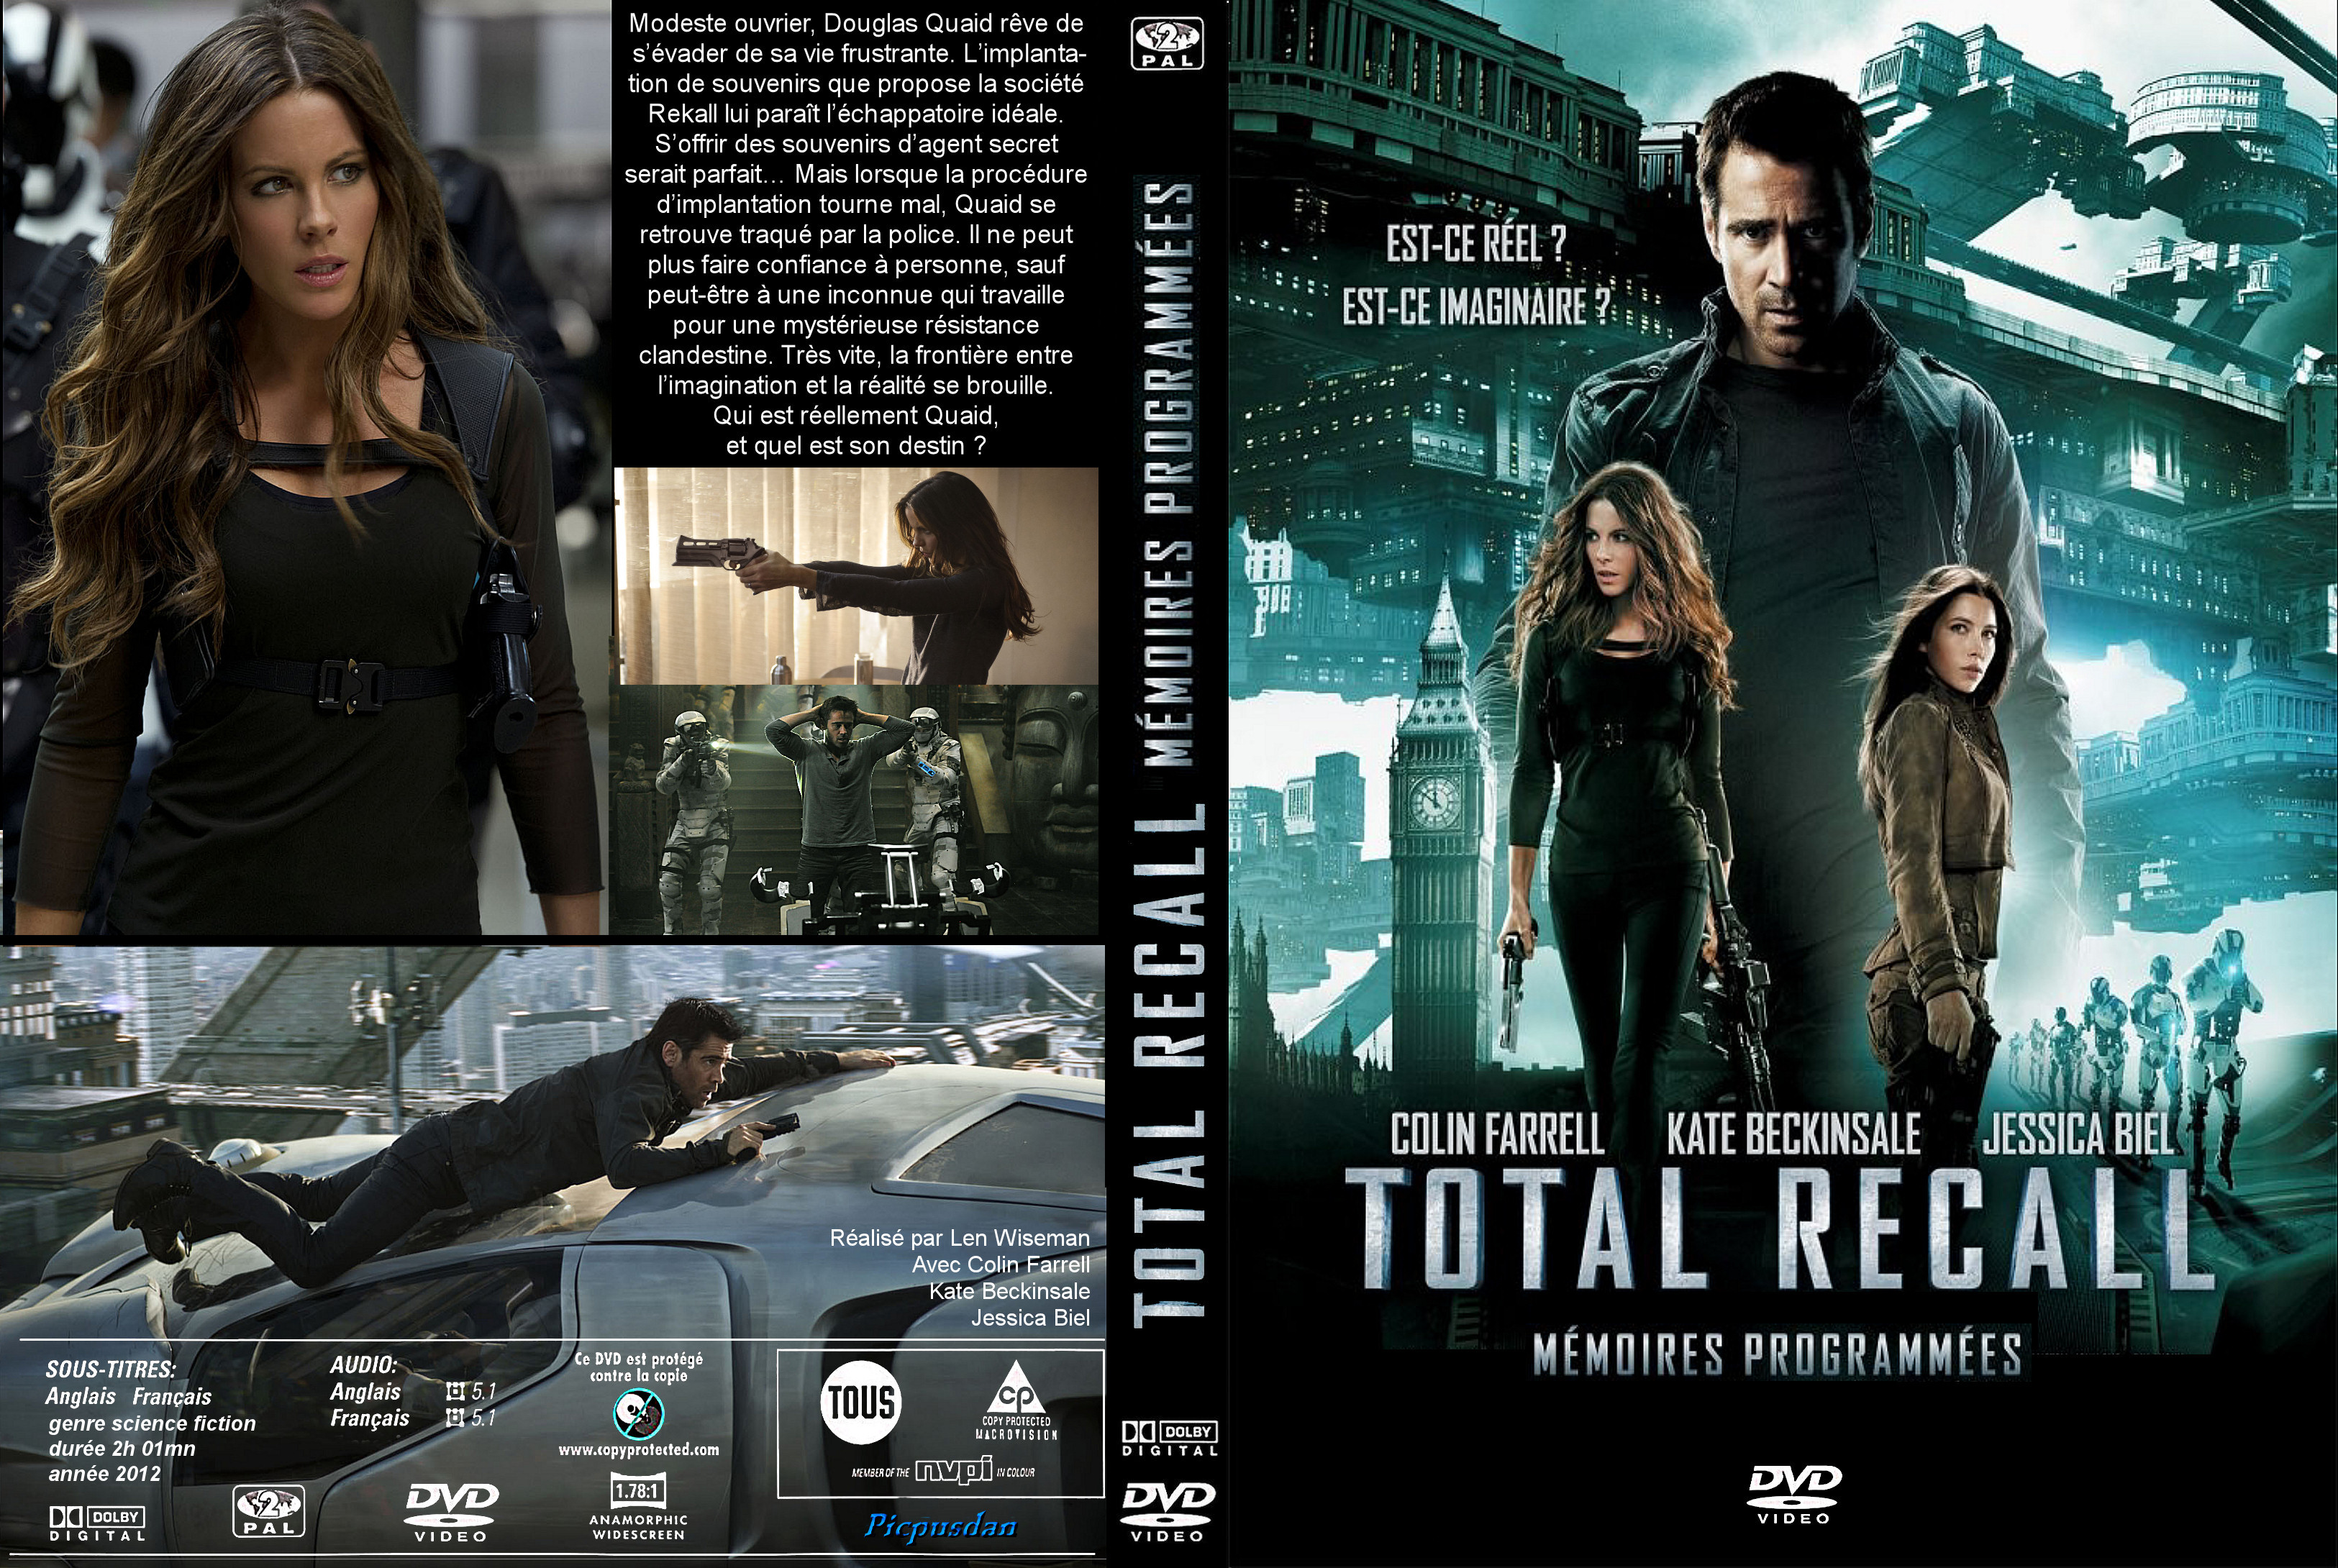 Jaquette DVD Total recall mmoires programmes custom